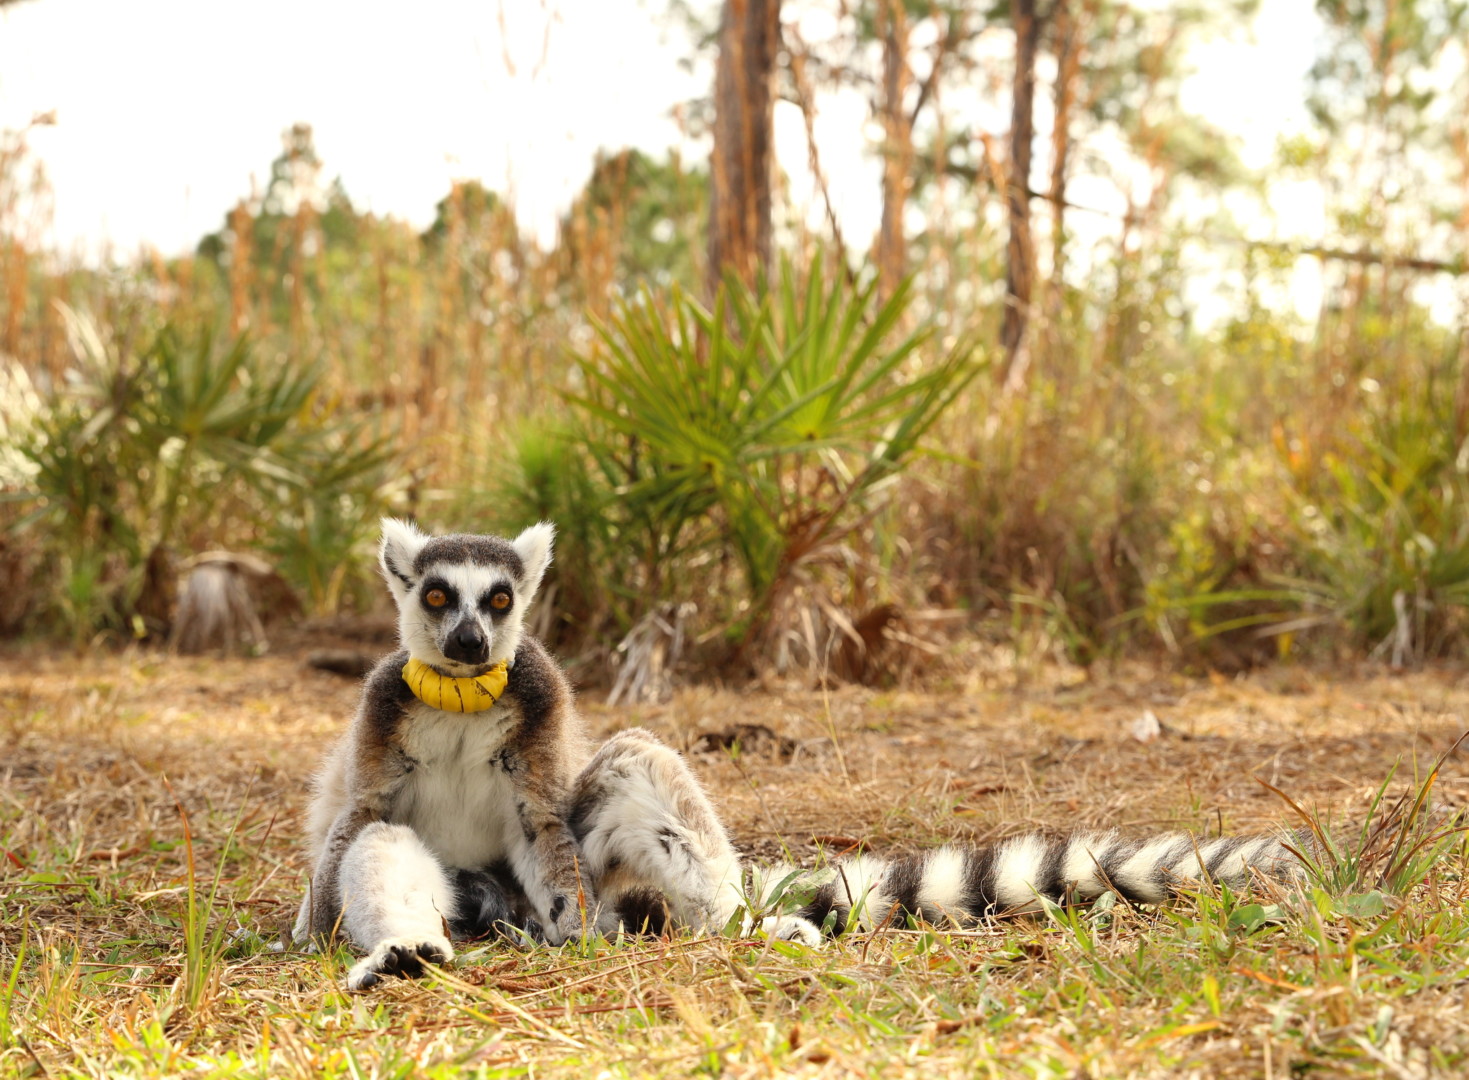 Ring-tailed lemur Yuengling sits on ground in forest and looks at camera